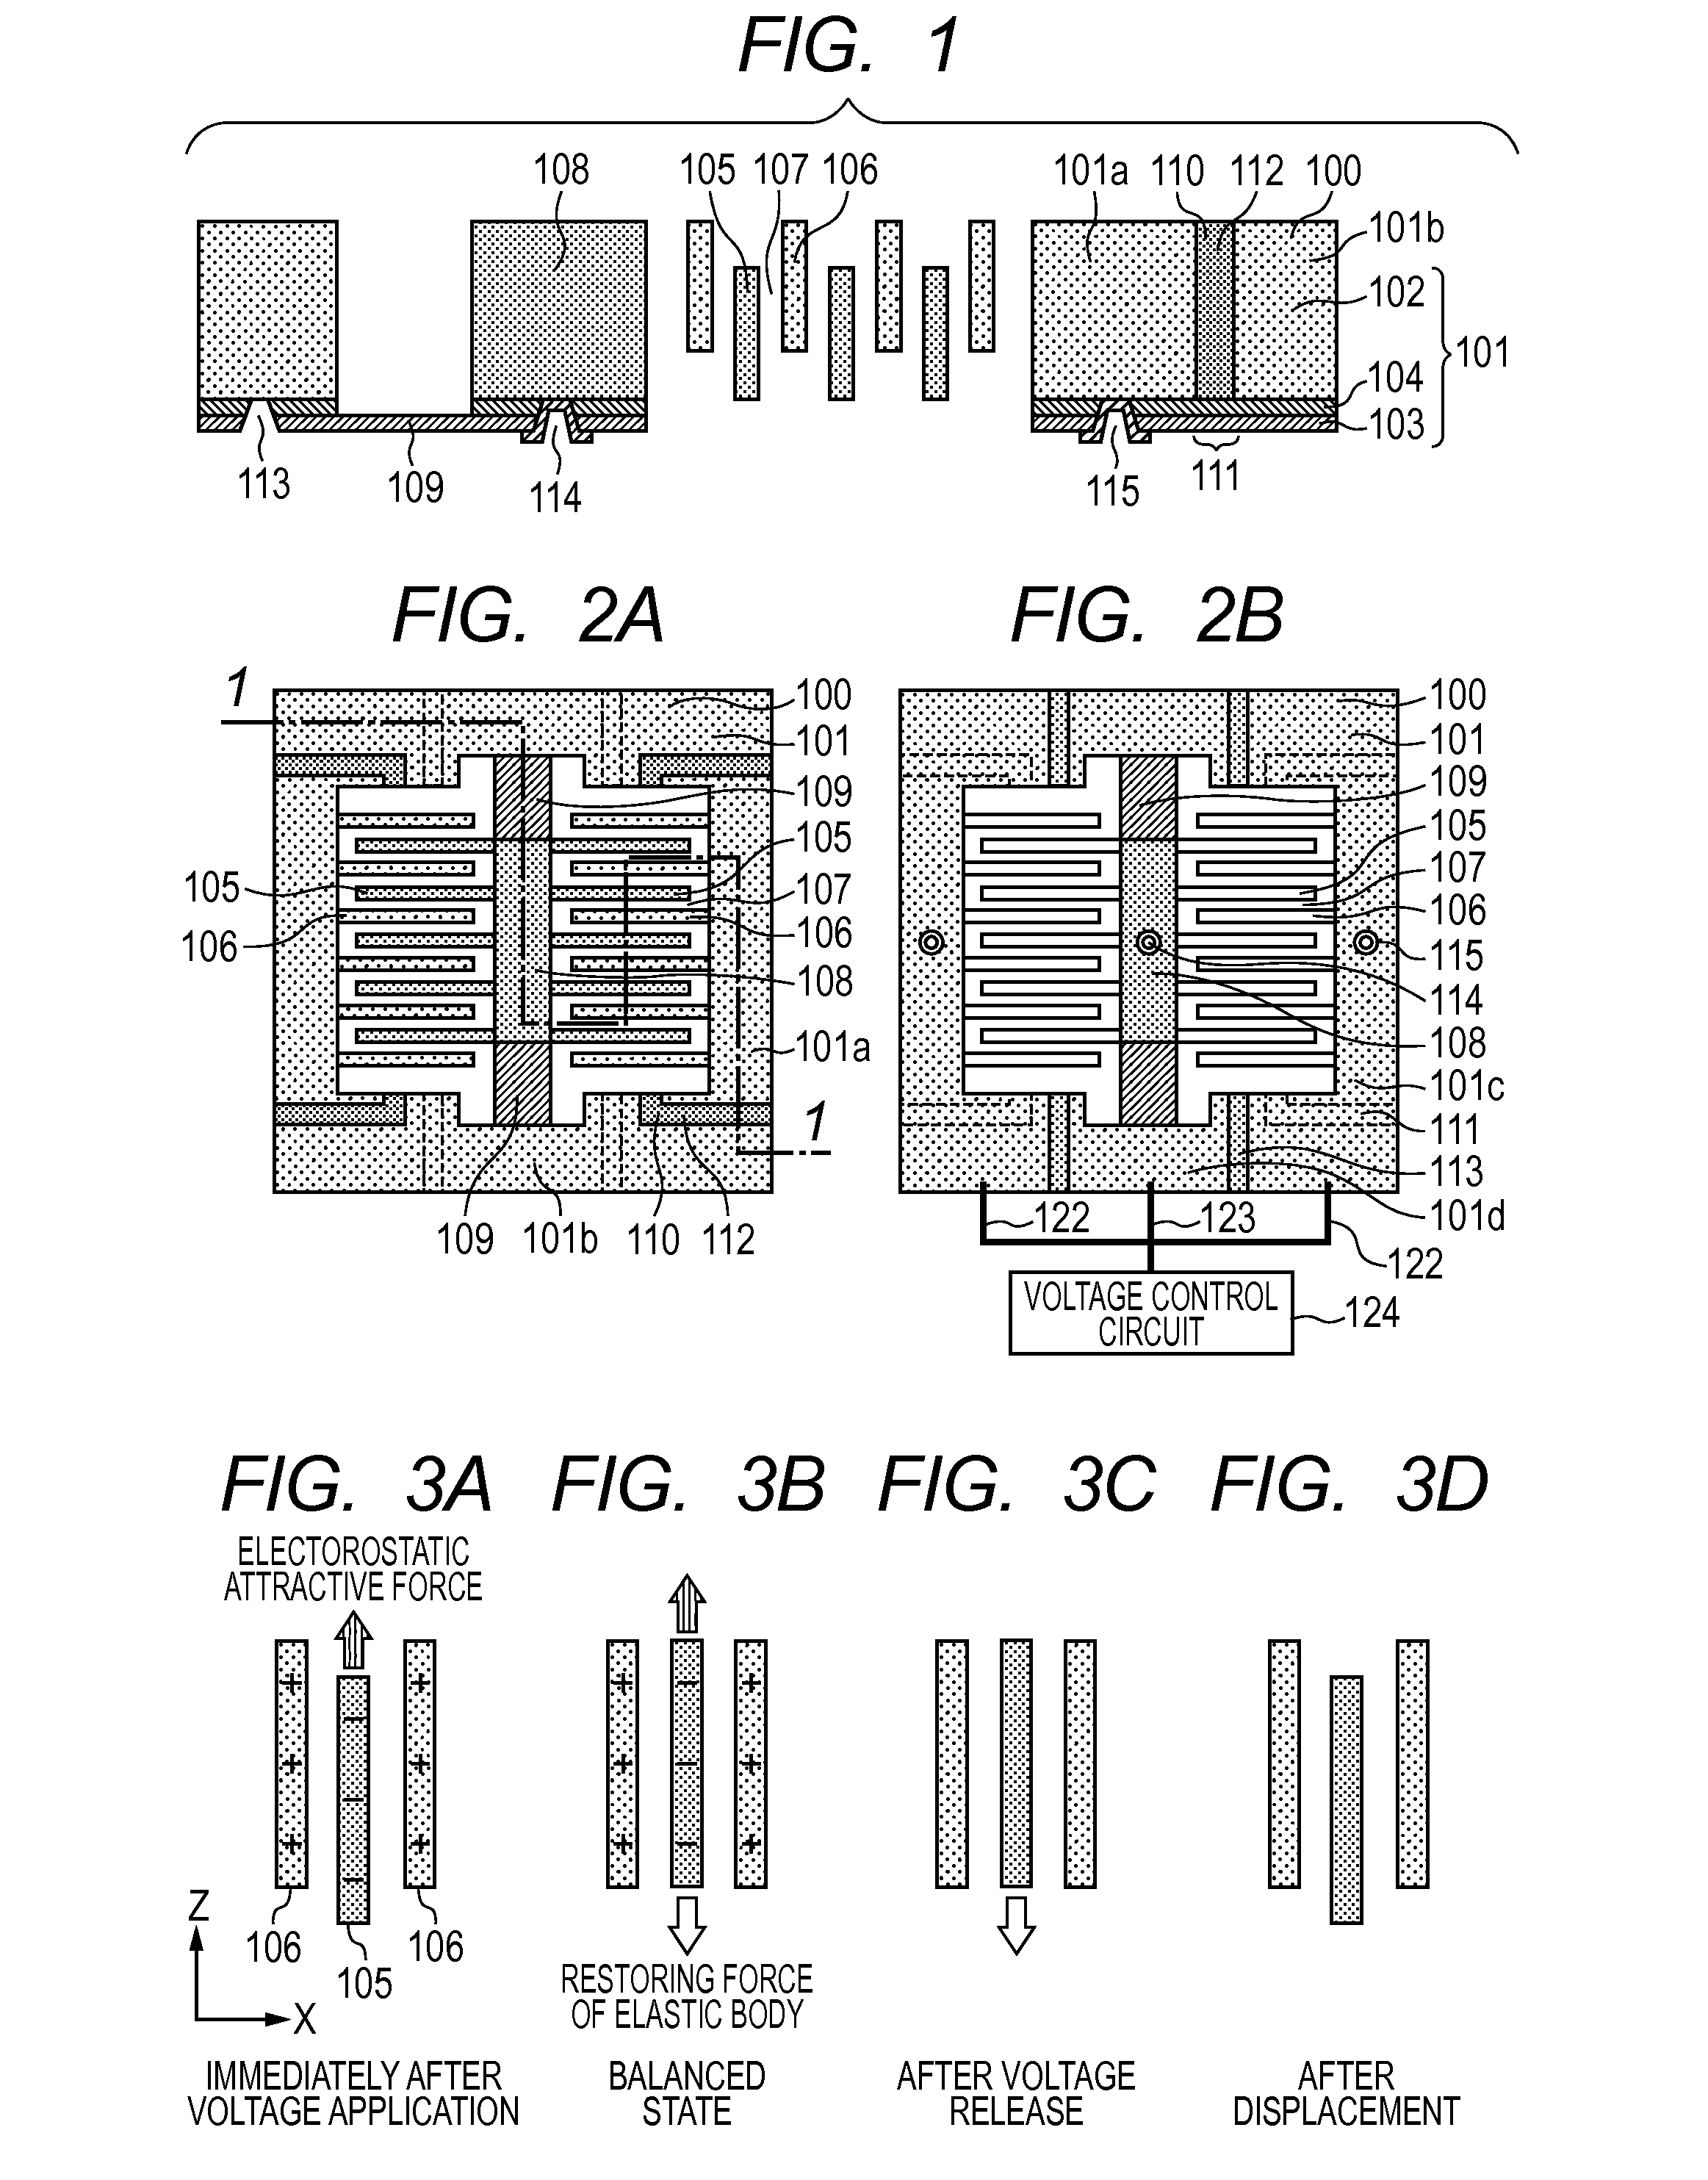 Electrostatic comb actuator, deformable mirror using the electrostatic comb actuator, adaptive optics system using the deformable mirror, and scanning laser ophthalmoscope using the adaptive optics system